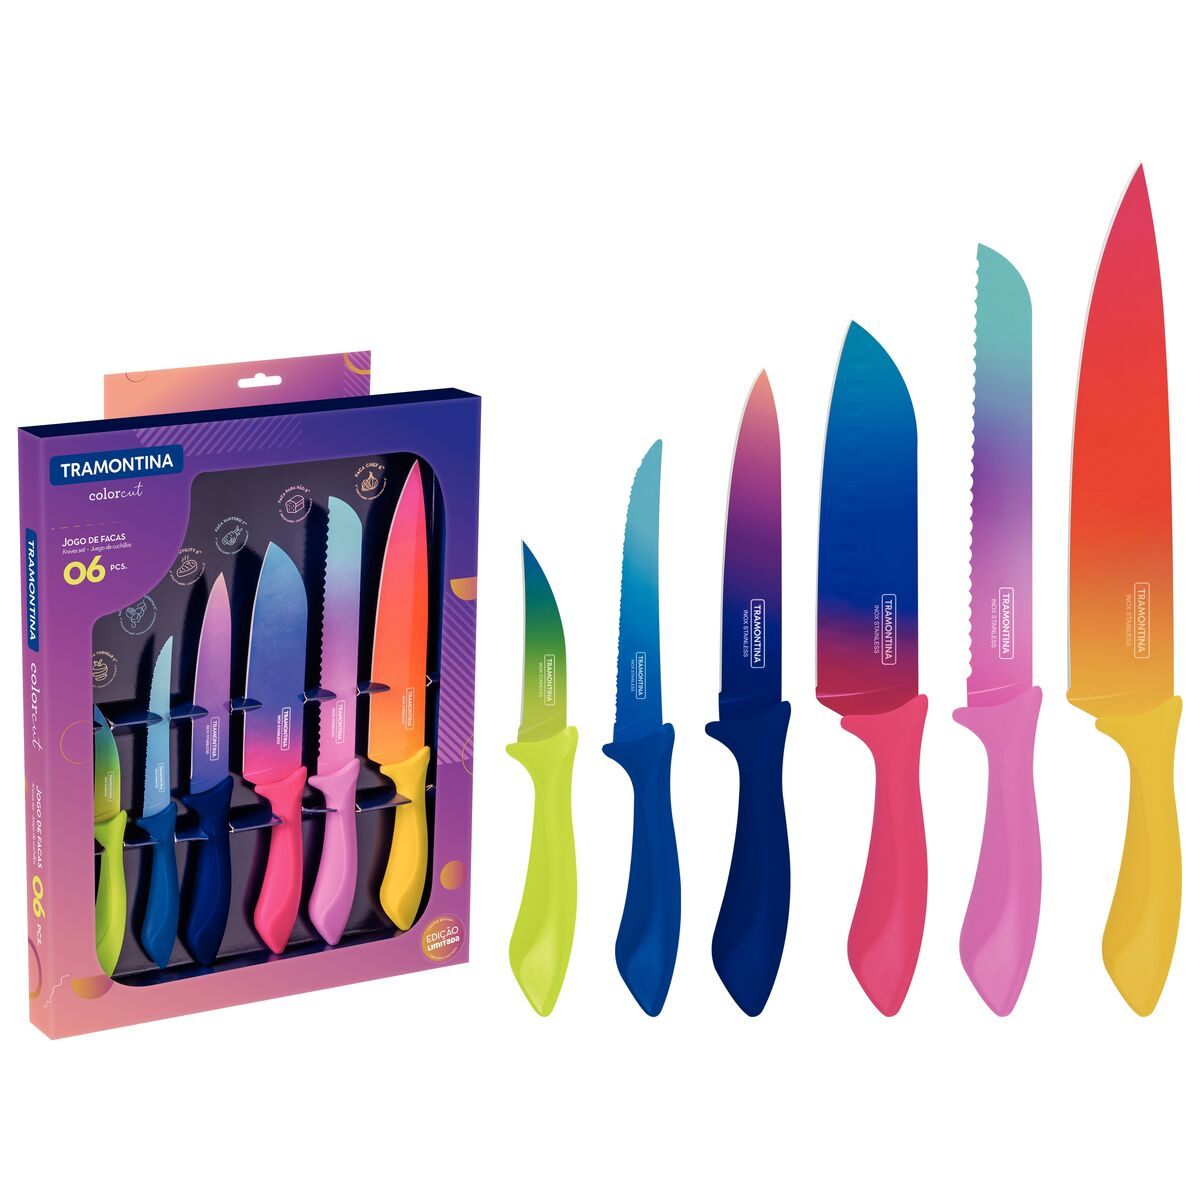 Tramontina Colorcut stainless steel painted knife set with polypropylene handles, 6 pcs